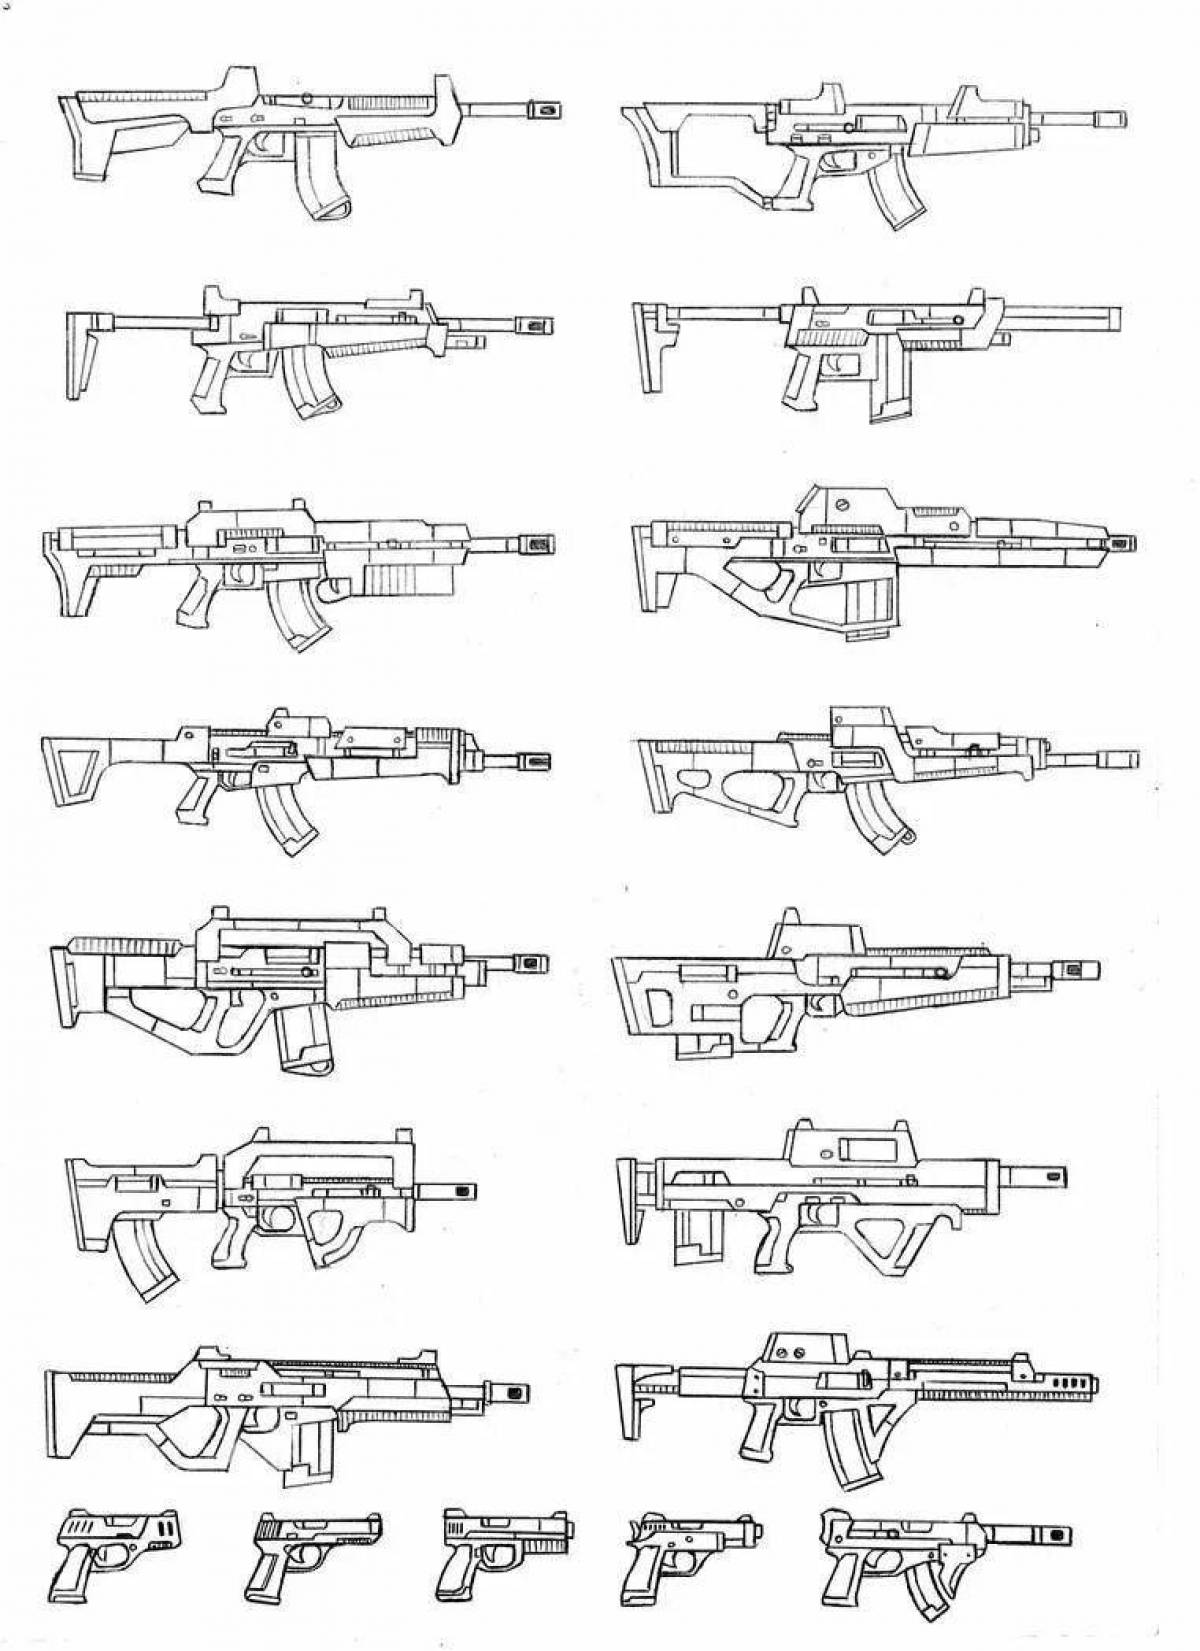 Colorful firearms coloring page